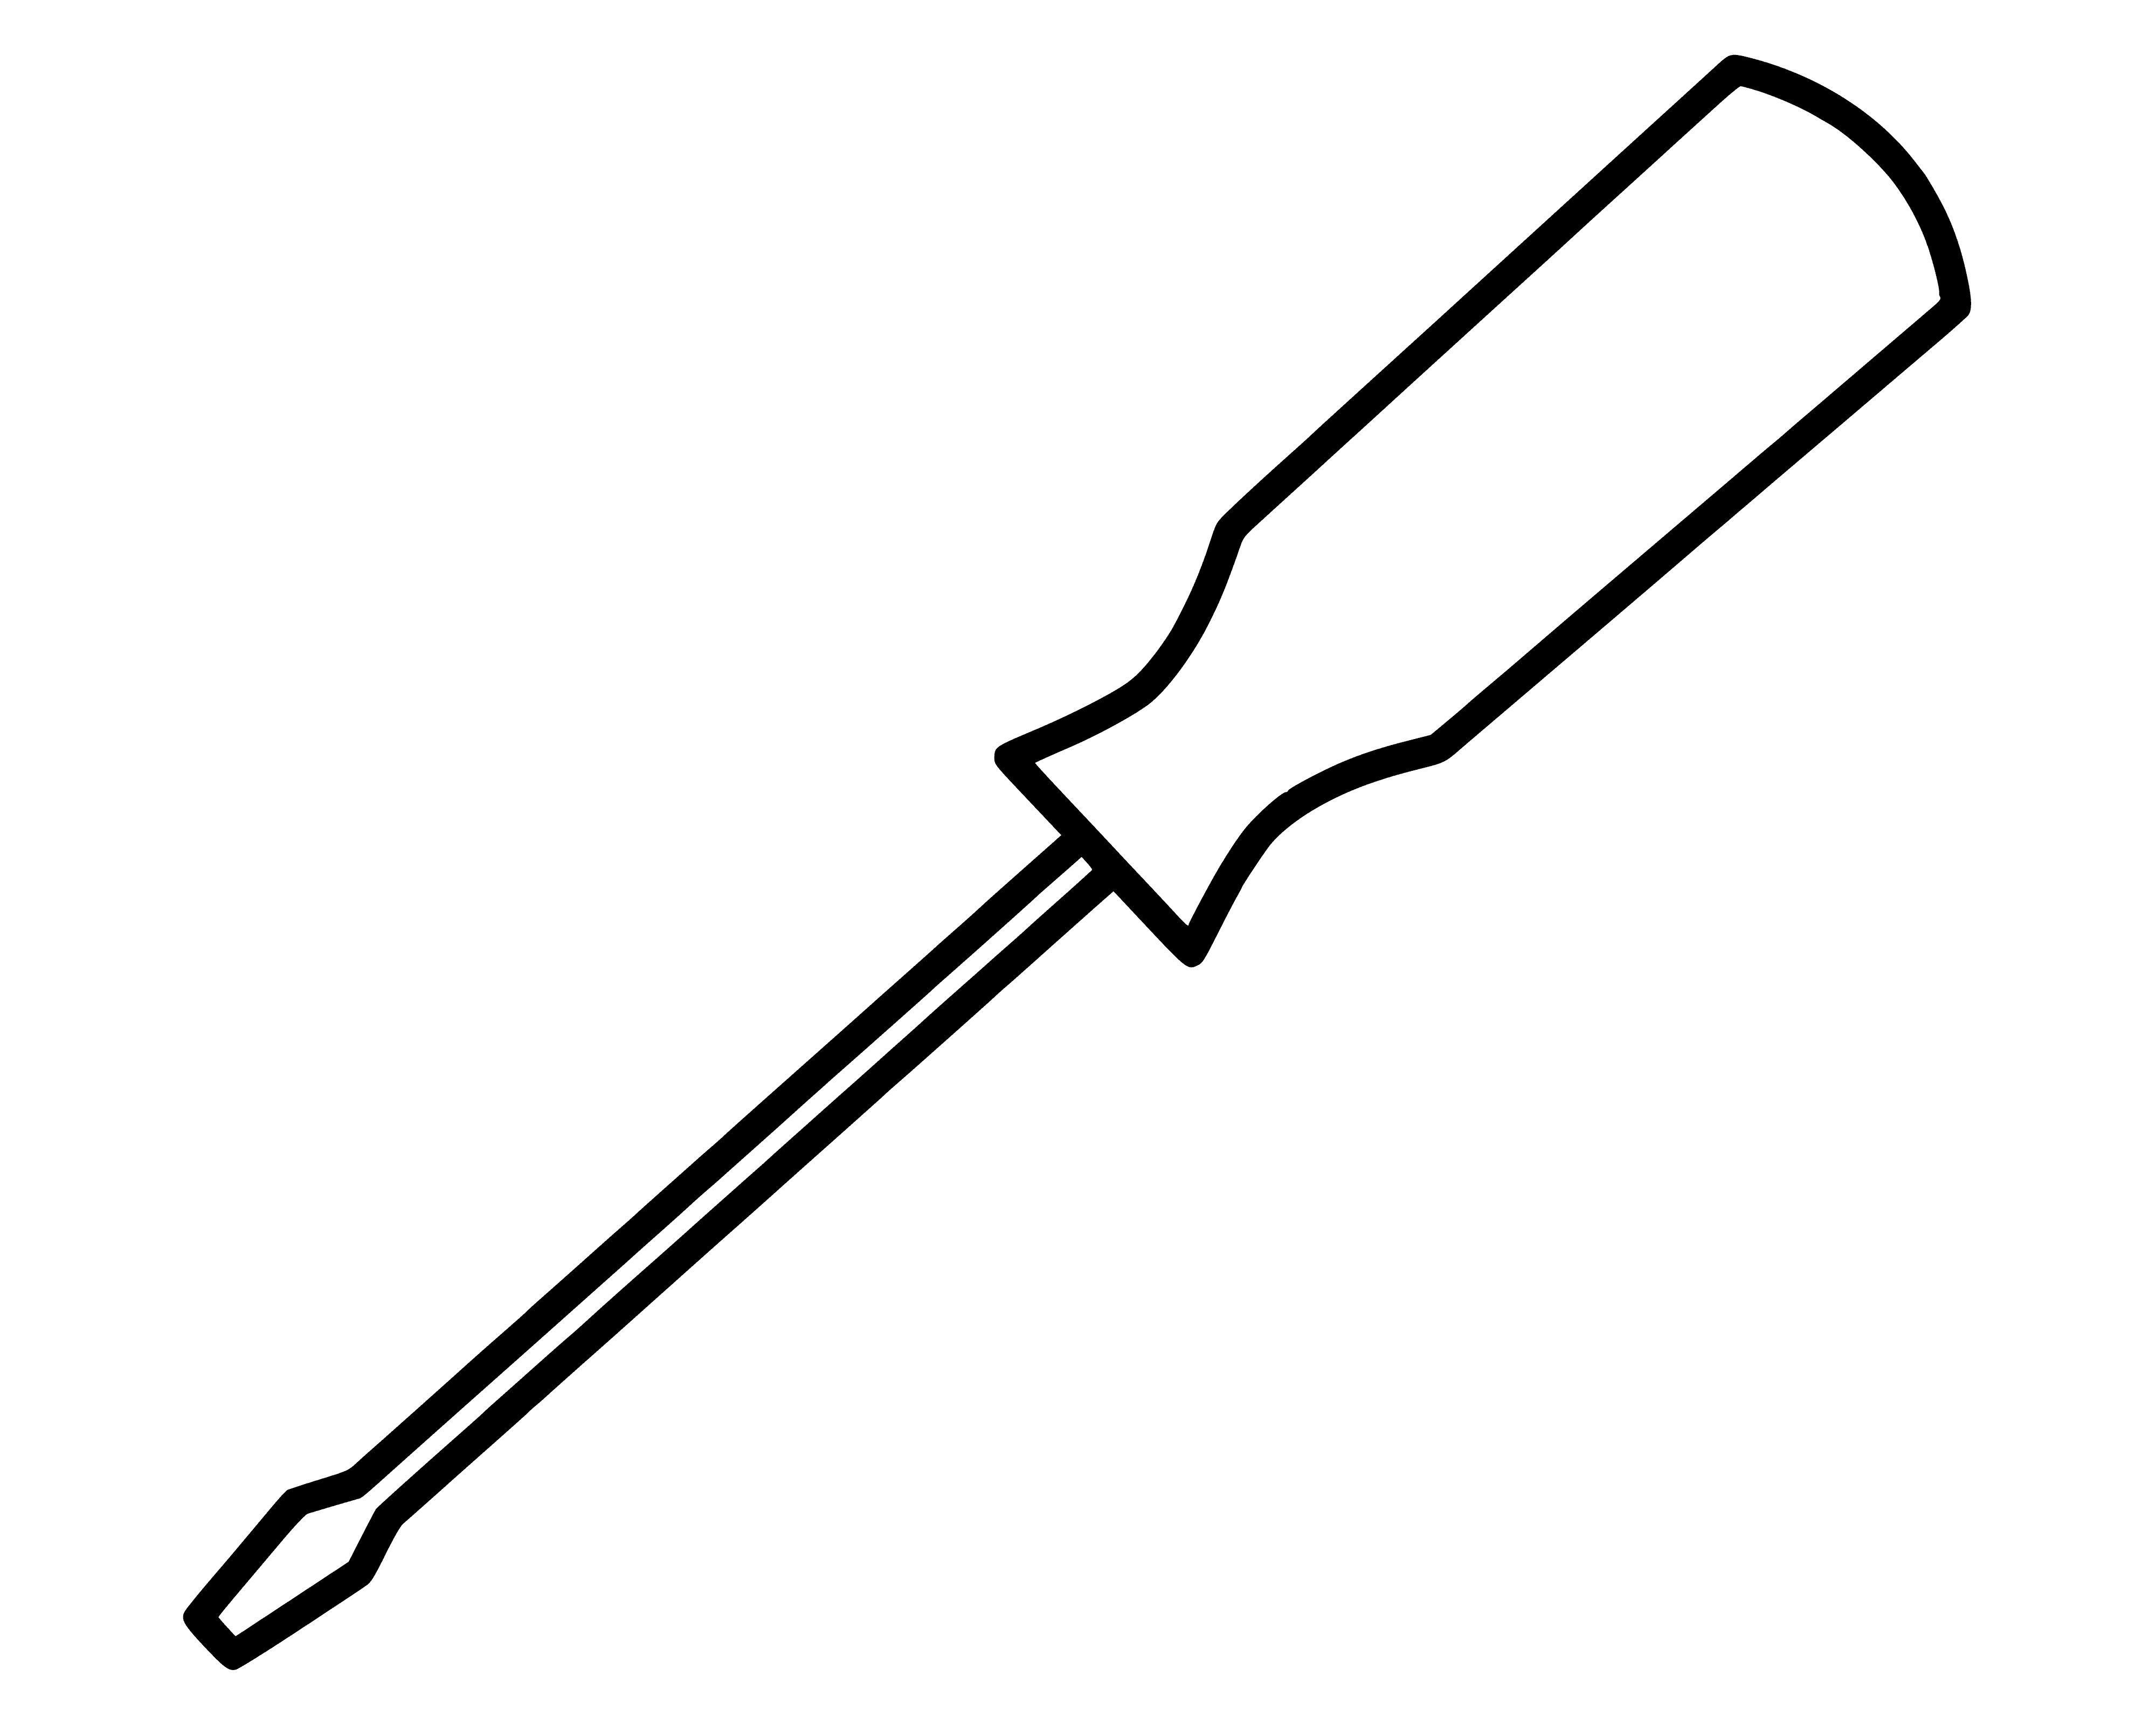 coloring page: Long metal rod has black grip handle & spiral end inserts into hole in handle side.